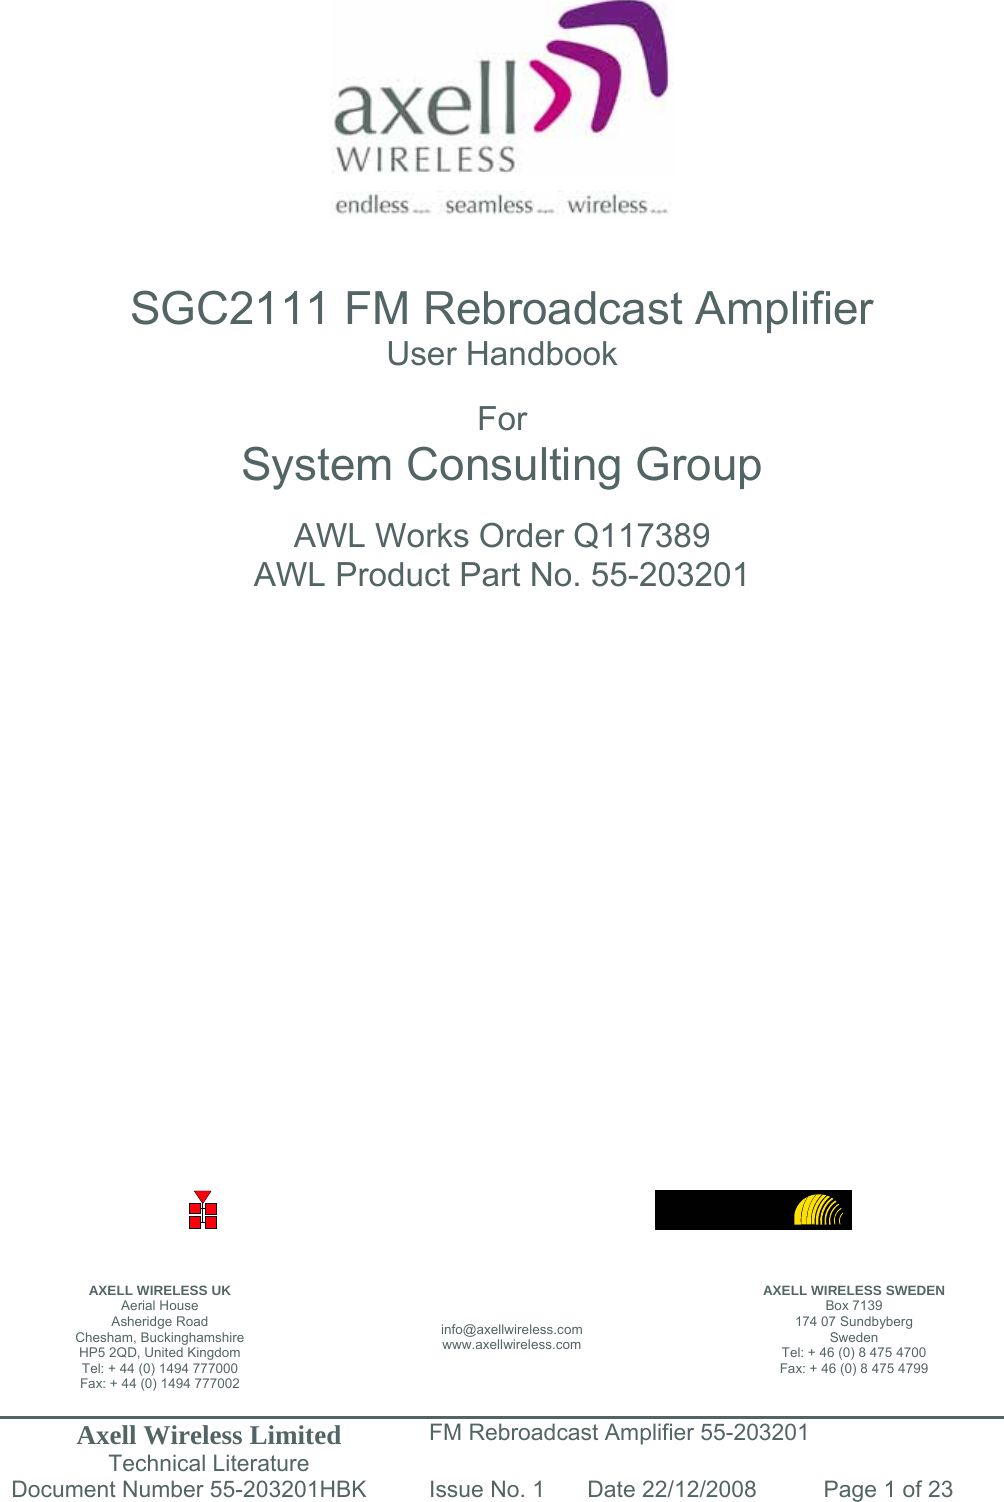 Axell Wireless Limited Technical Literature FM Rebroadcast Amplifier 55-203201 Document Number 55-203201HBK Issue No. 1  Date 22/12/2008  Page 1 of 23                    SGC2111 FM Rebroadcast Amplifier User Handbook  For System Consulting Group  AWL Works Order Q117389 AWL Product Part No. 55-203201                           AXELL WIRELESS UK Aerial House Asheridge Road Chesham, Buckinghamshire HP5 2QD, United Kingdom Tel: + 44 (0) 1494 777000 Fax: + 44 (0) 1494 777002 info@axellwireless.com www.axellwireless.com AXELL WIRELESS SWEDEN Box 7139 174 07 Sundbyberg Sweden Tel: + 46 (0) 8 475 4700 Fax: + 46 (0) 8 475 4799 